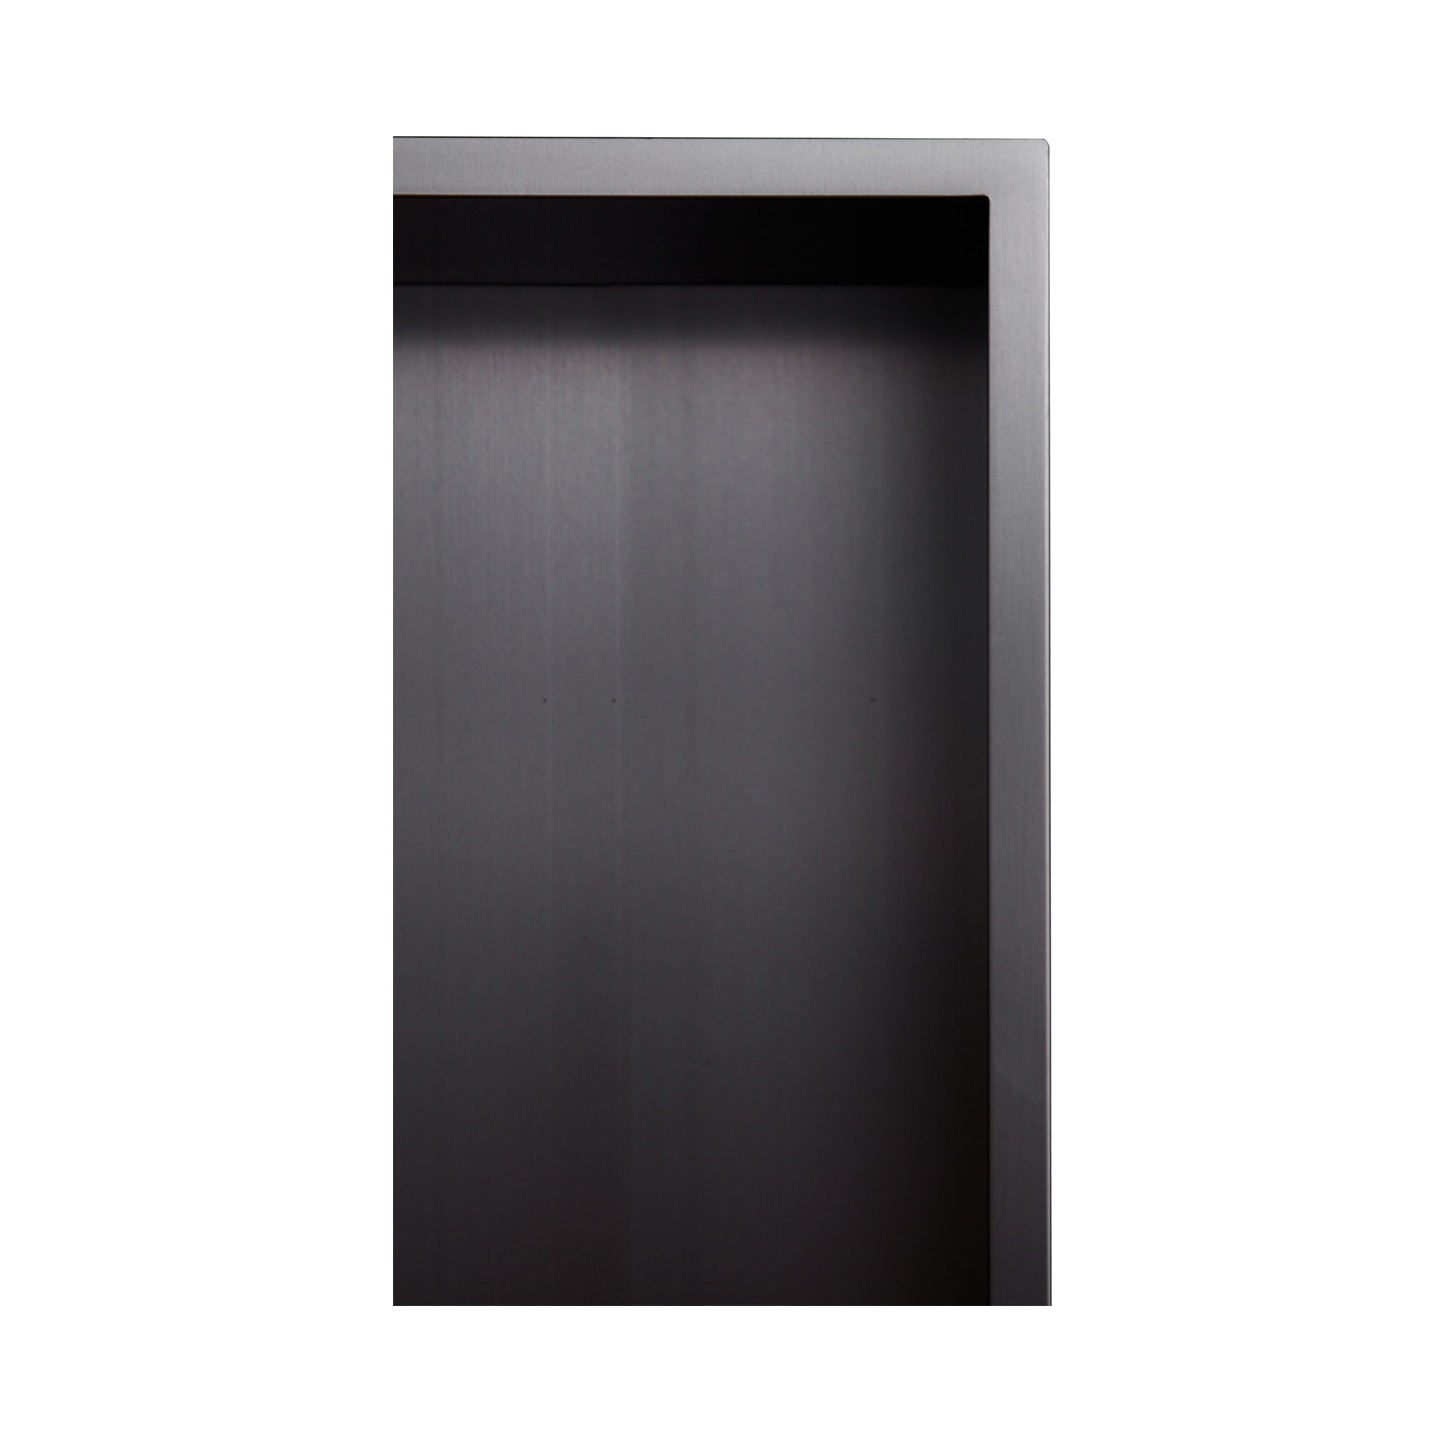 STAINLESS STEEL ONE BOX WALL NICHE